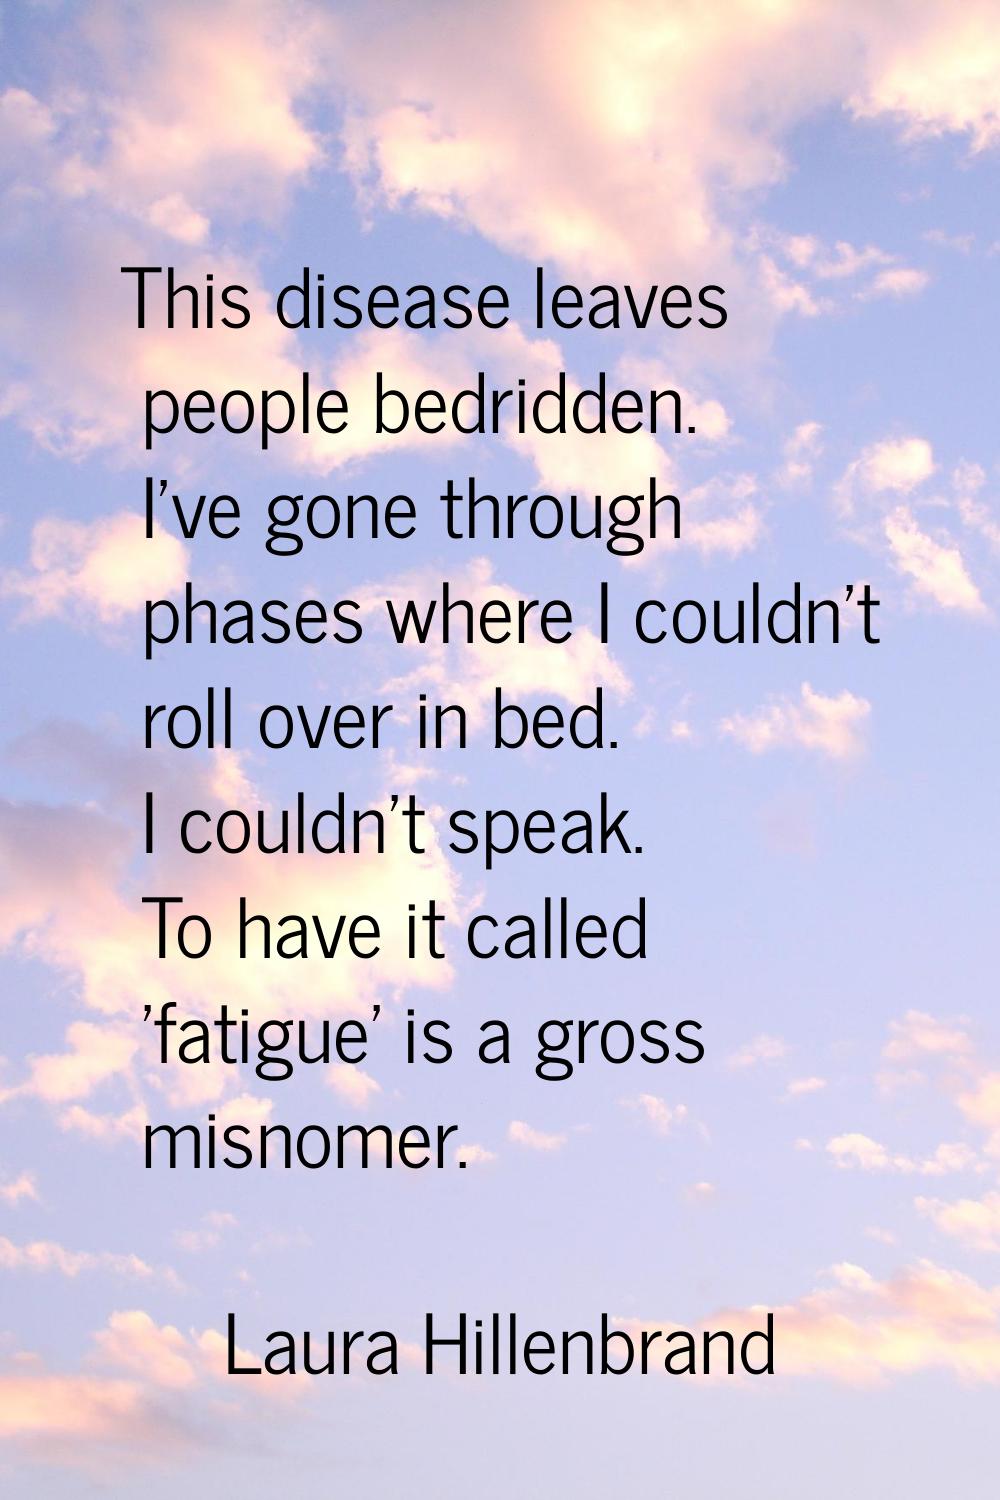 This disease leaves people bedridden. I've gone through phases where I couldn't roll over in bed. I